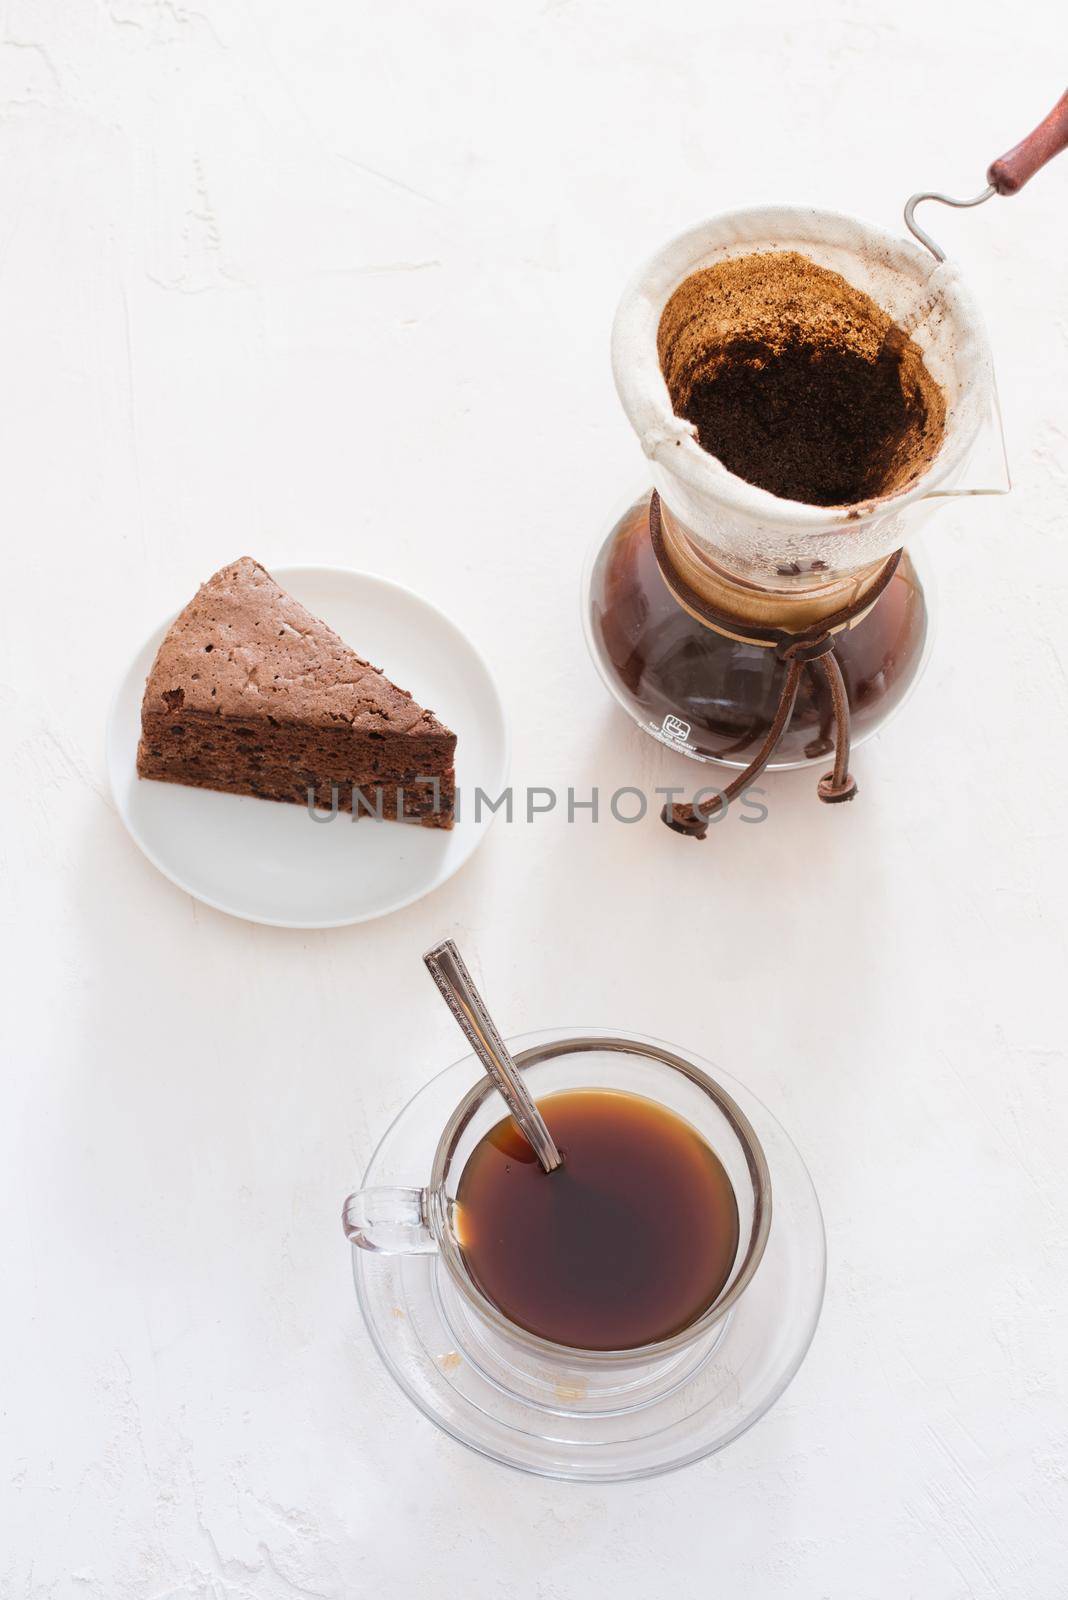 Drip coffee (dripper) and drip ground coffee with glass drip pot, cup and chocolate cake